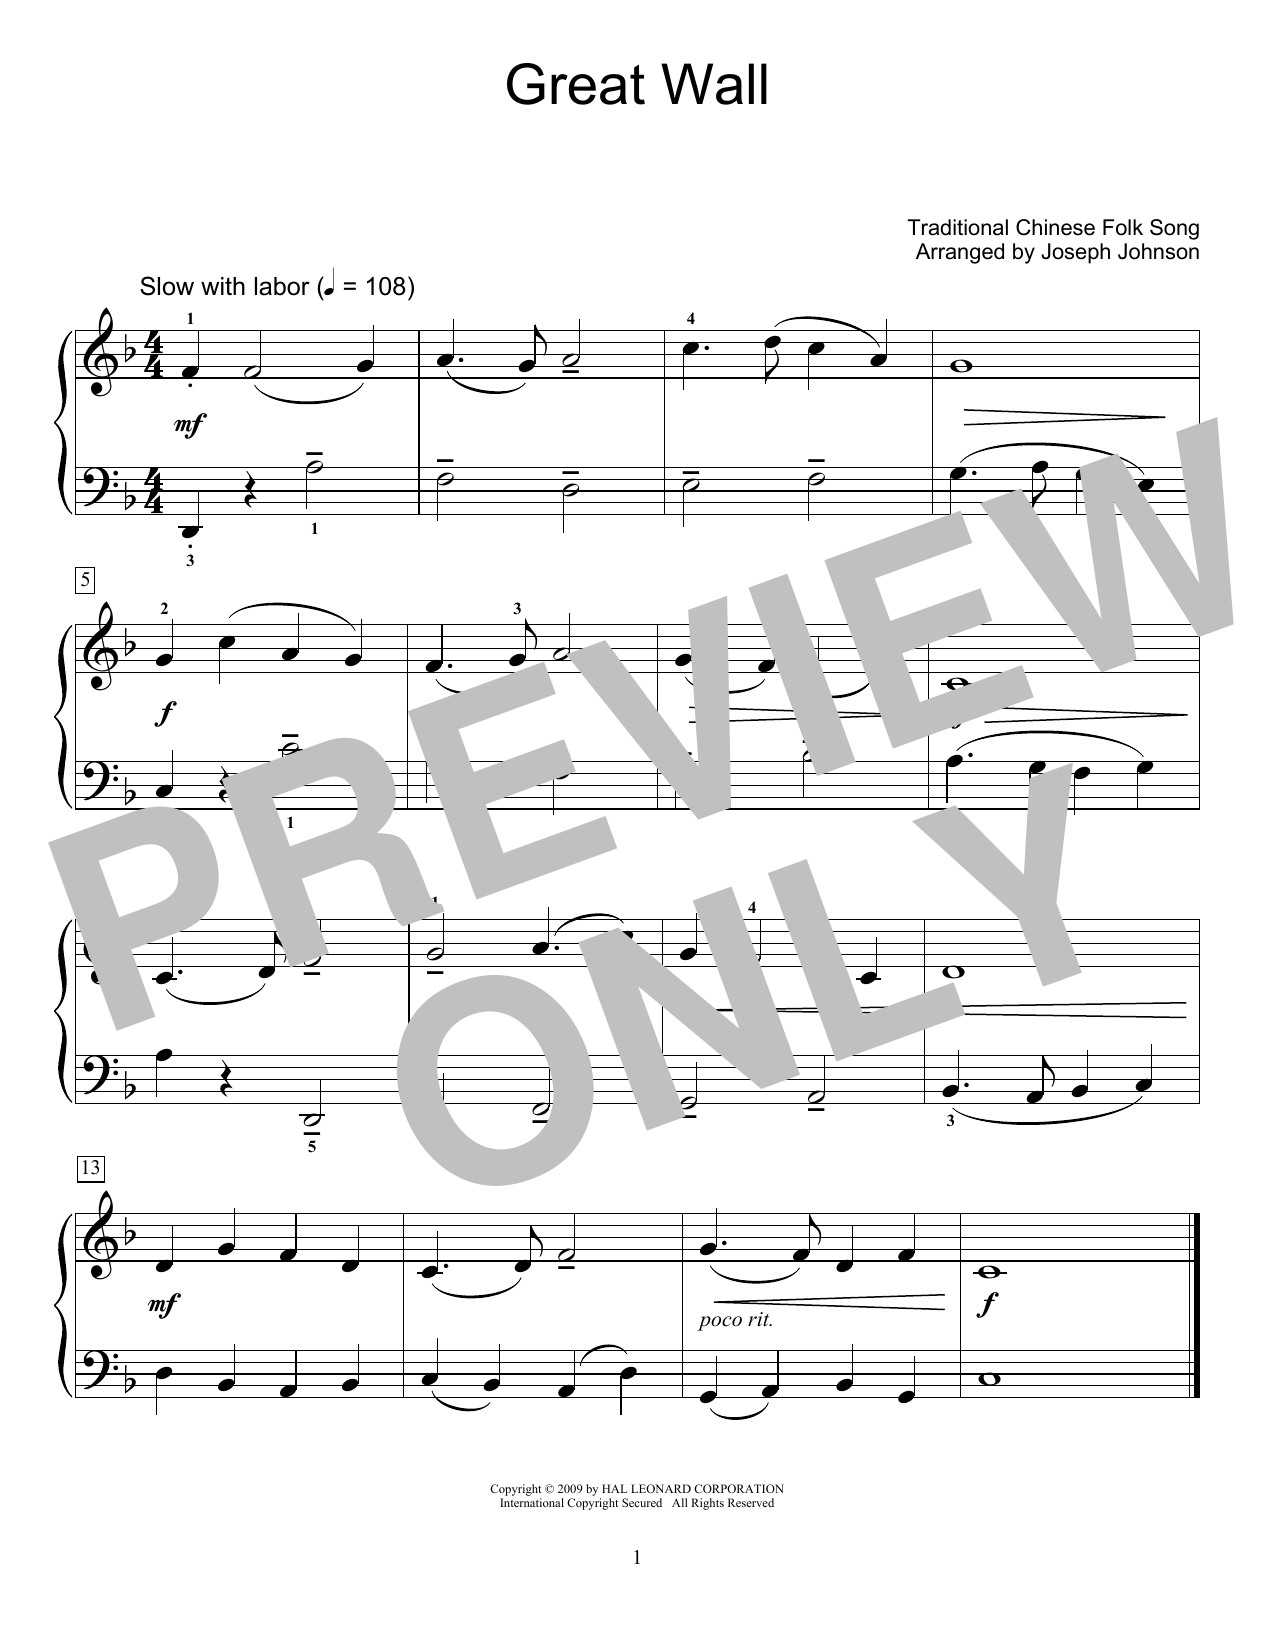 Download Traditional Chinese Folk Song Great Wall (arr. Joseph Johnson) Sheet Music